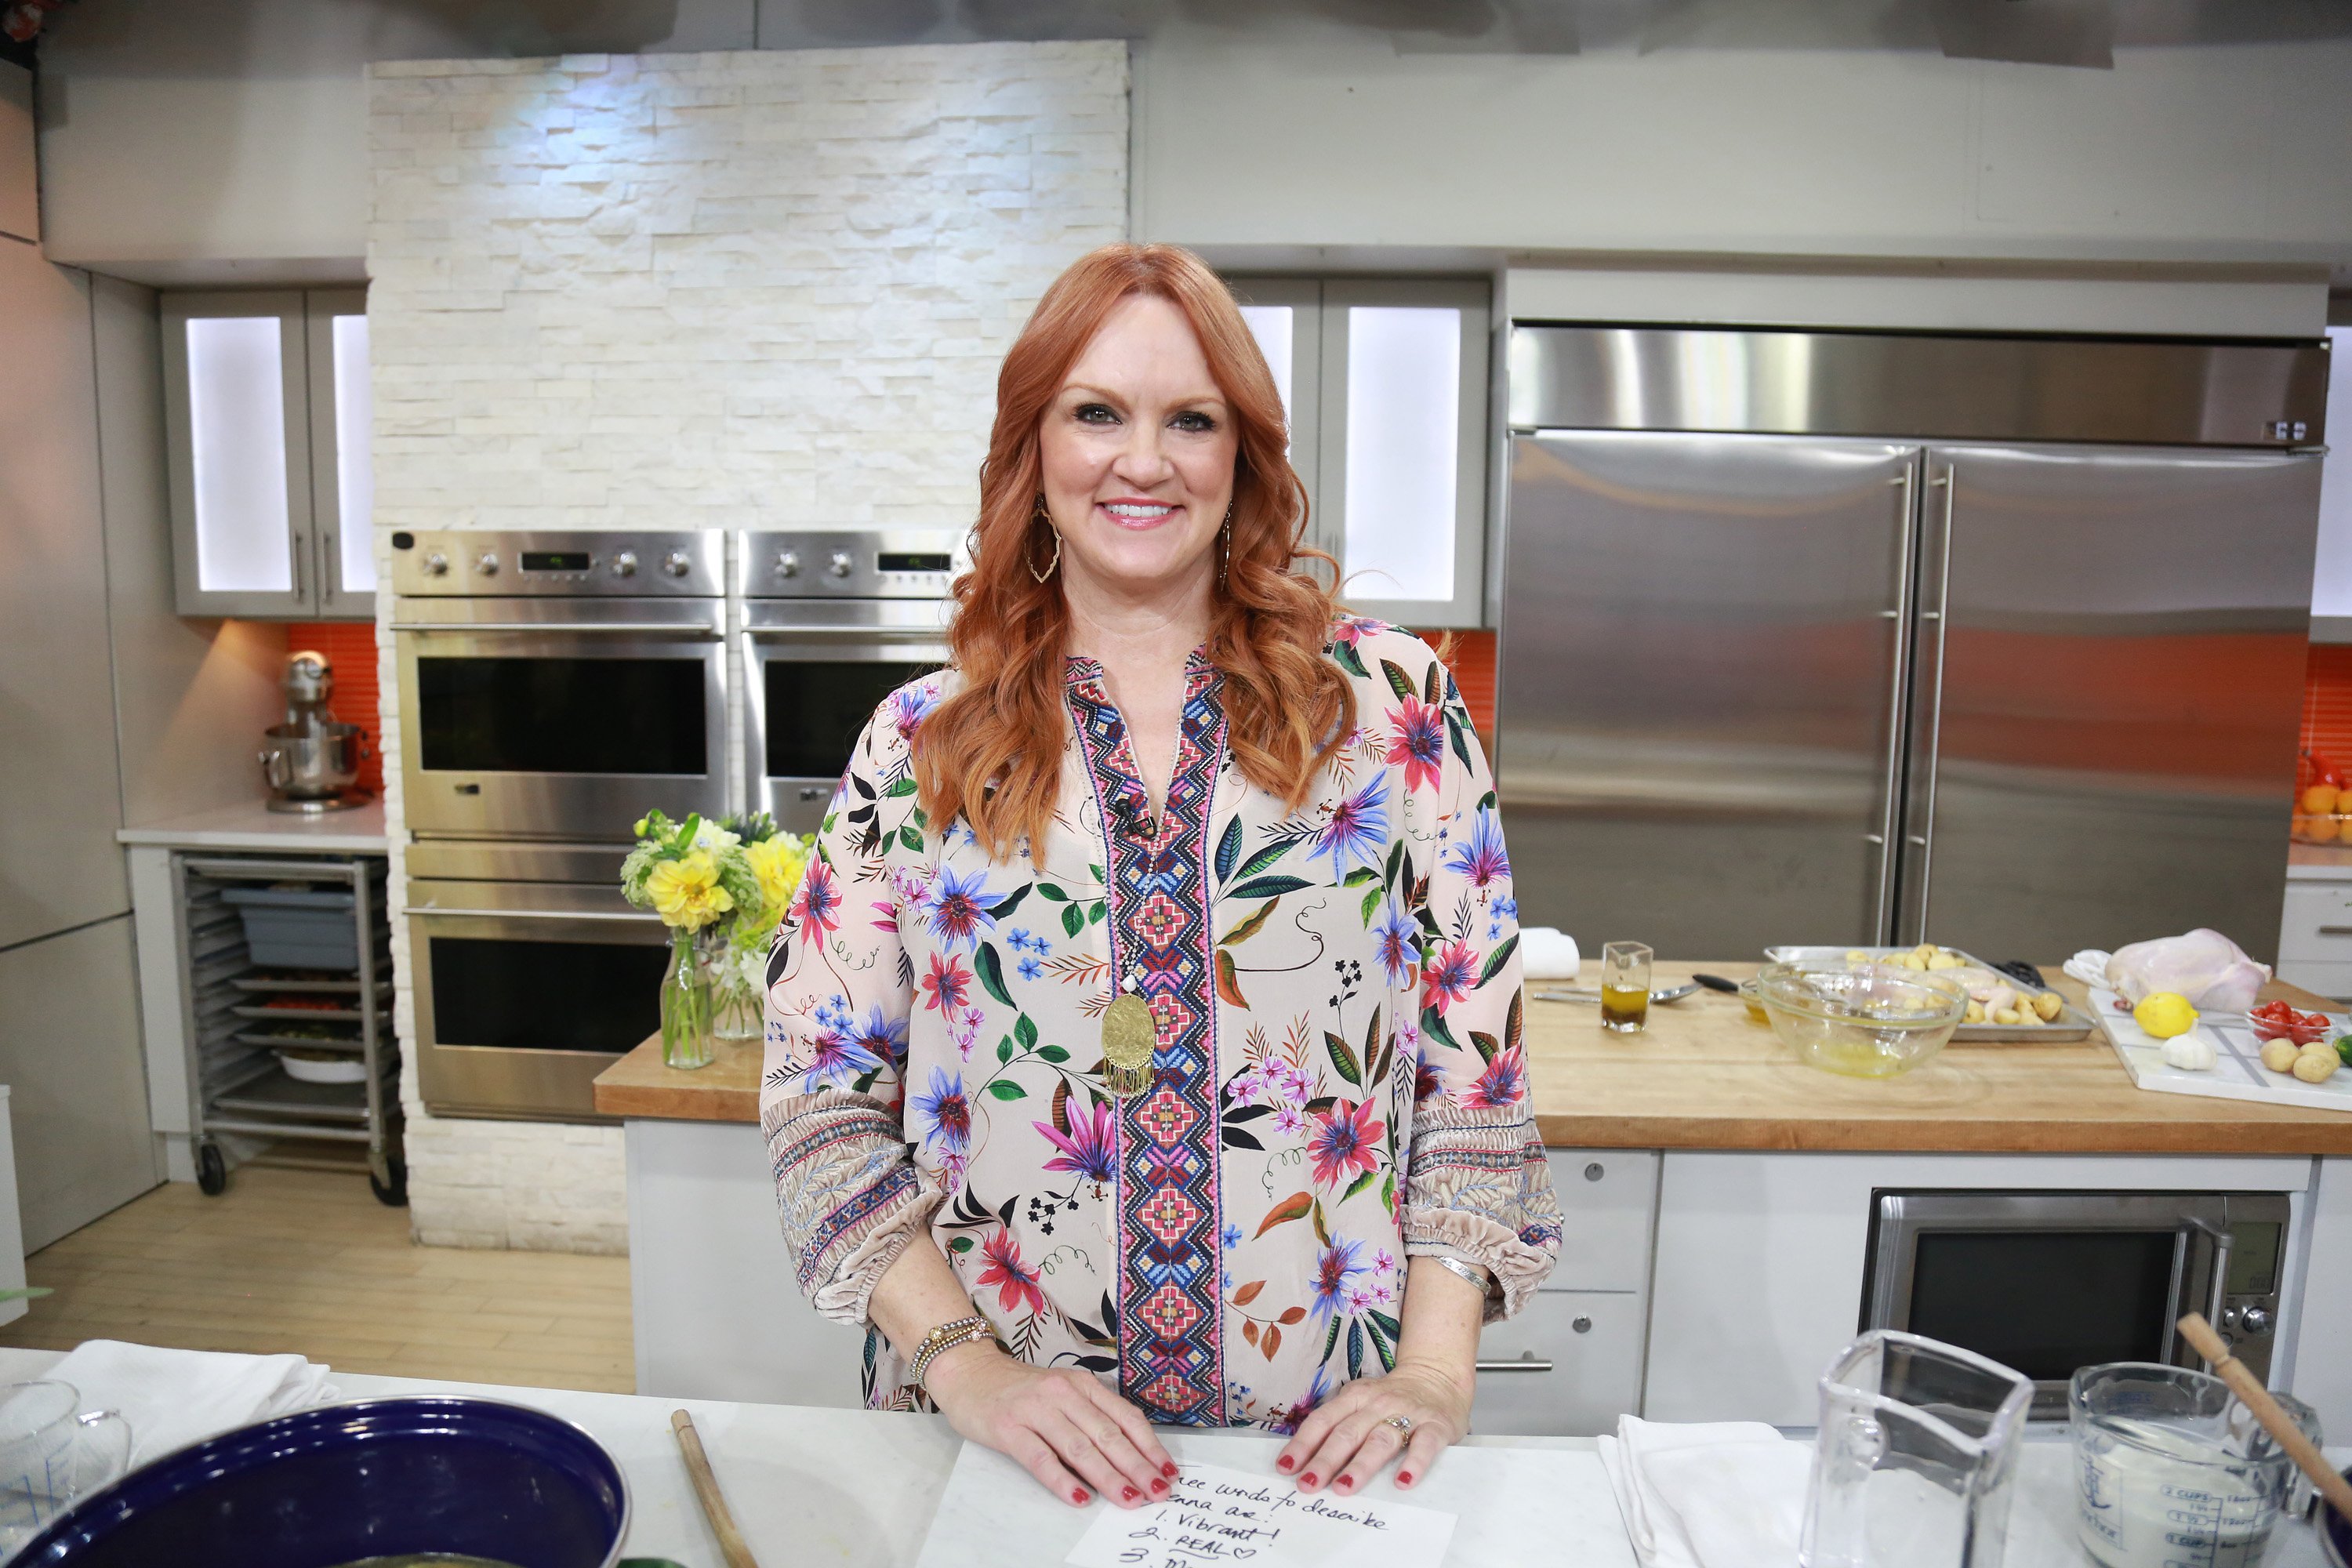 The Pioneer Woman - Ree Drummond - Be still my heart! This is one